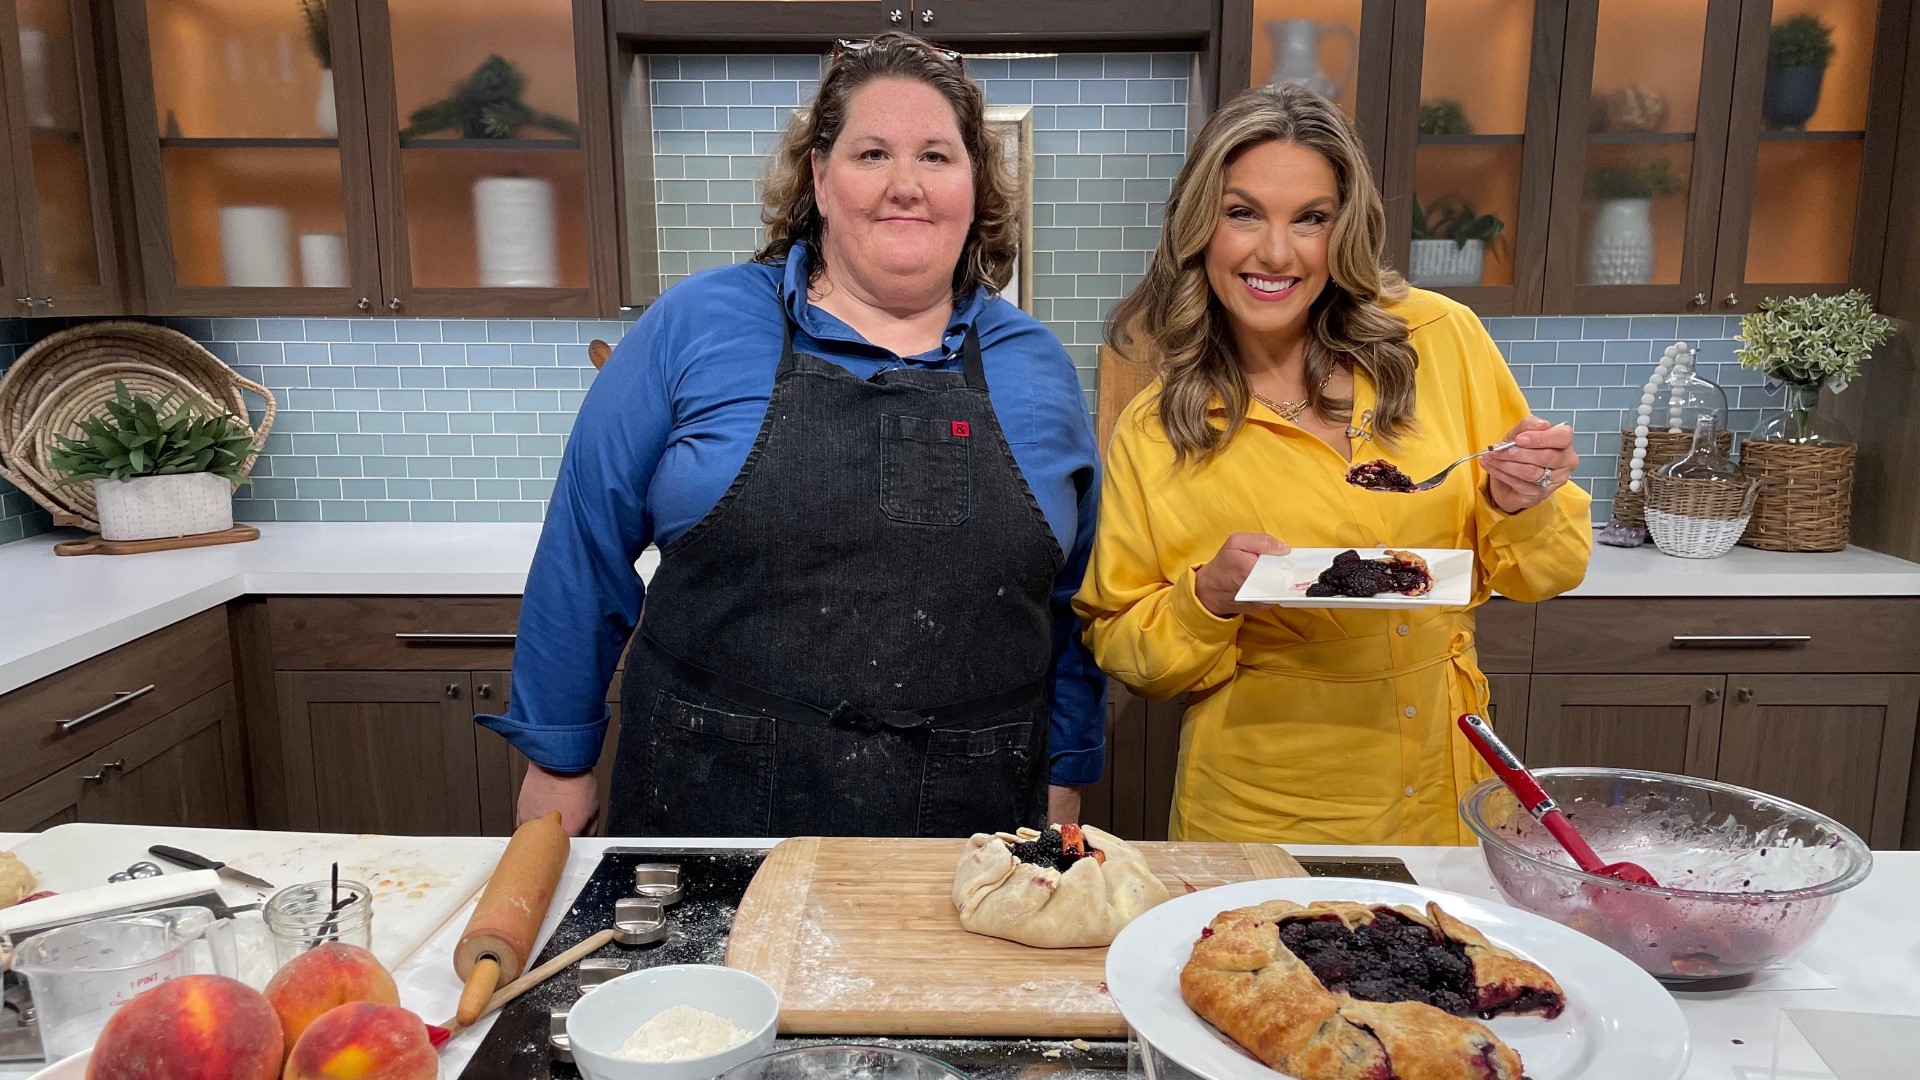 Laurie Pfalzer, author of the cookbook "Simple Fruit," joined the show to cook a sweet summer recipe with blackberries and peaches. #newdaynw